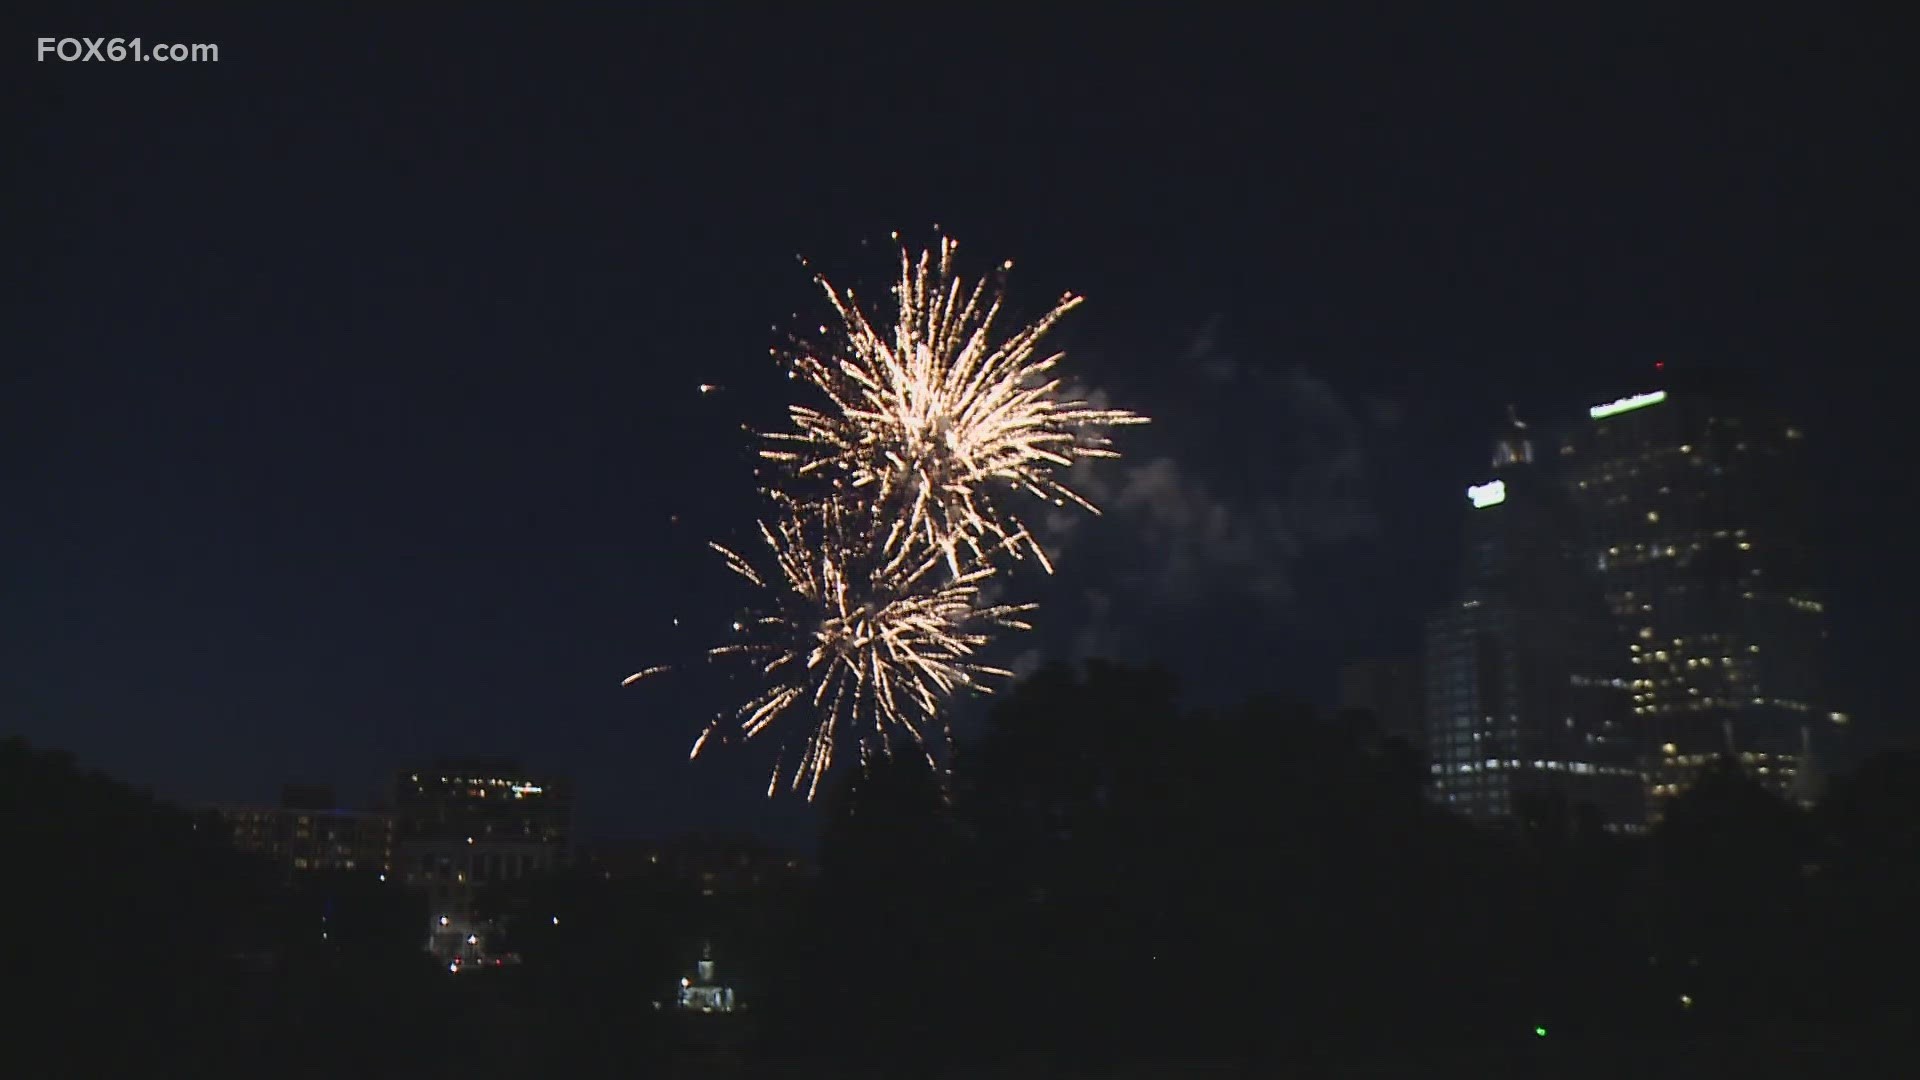 Bushnell Park is where all the magic will happen. Food trucks, live music, and of course, no 4th of July celebration is complete without a firework show.